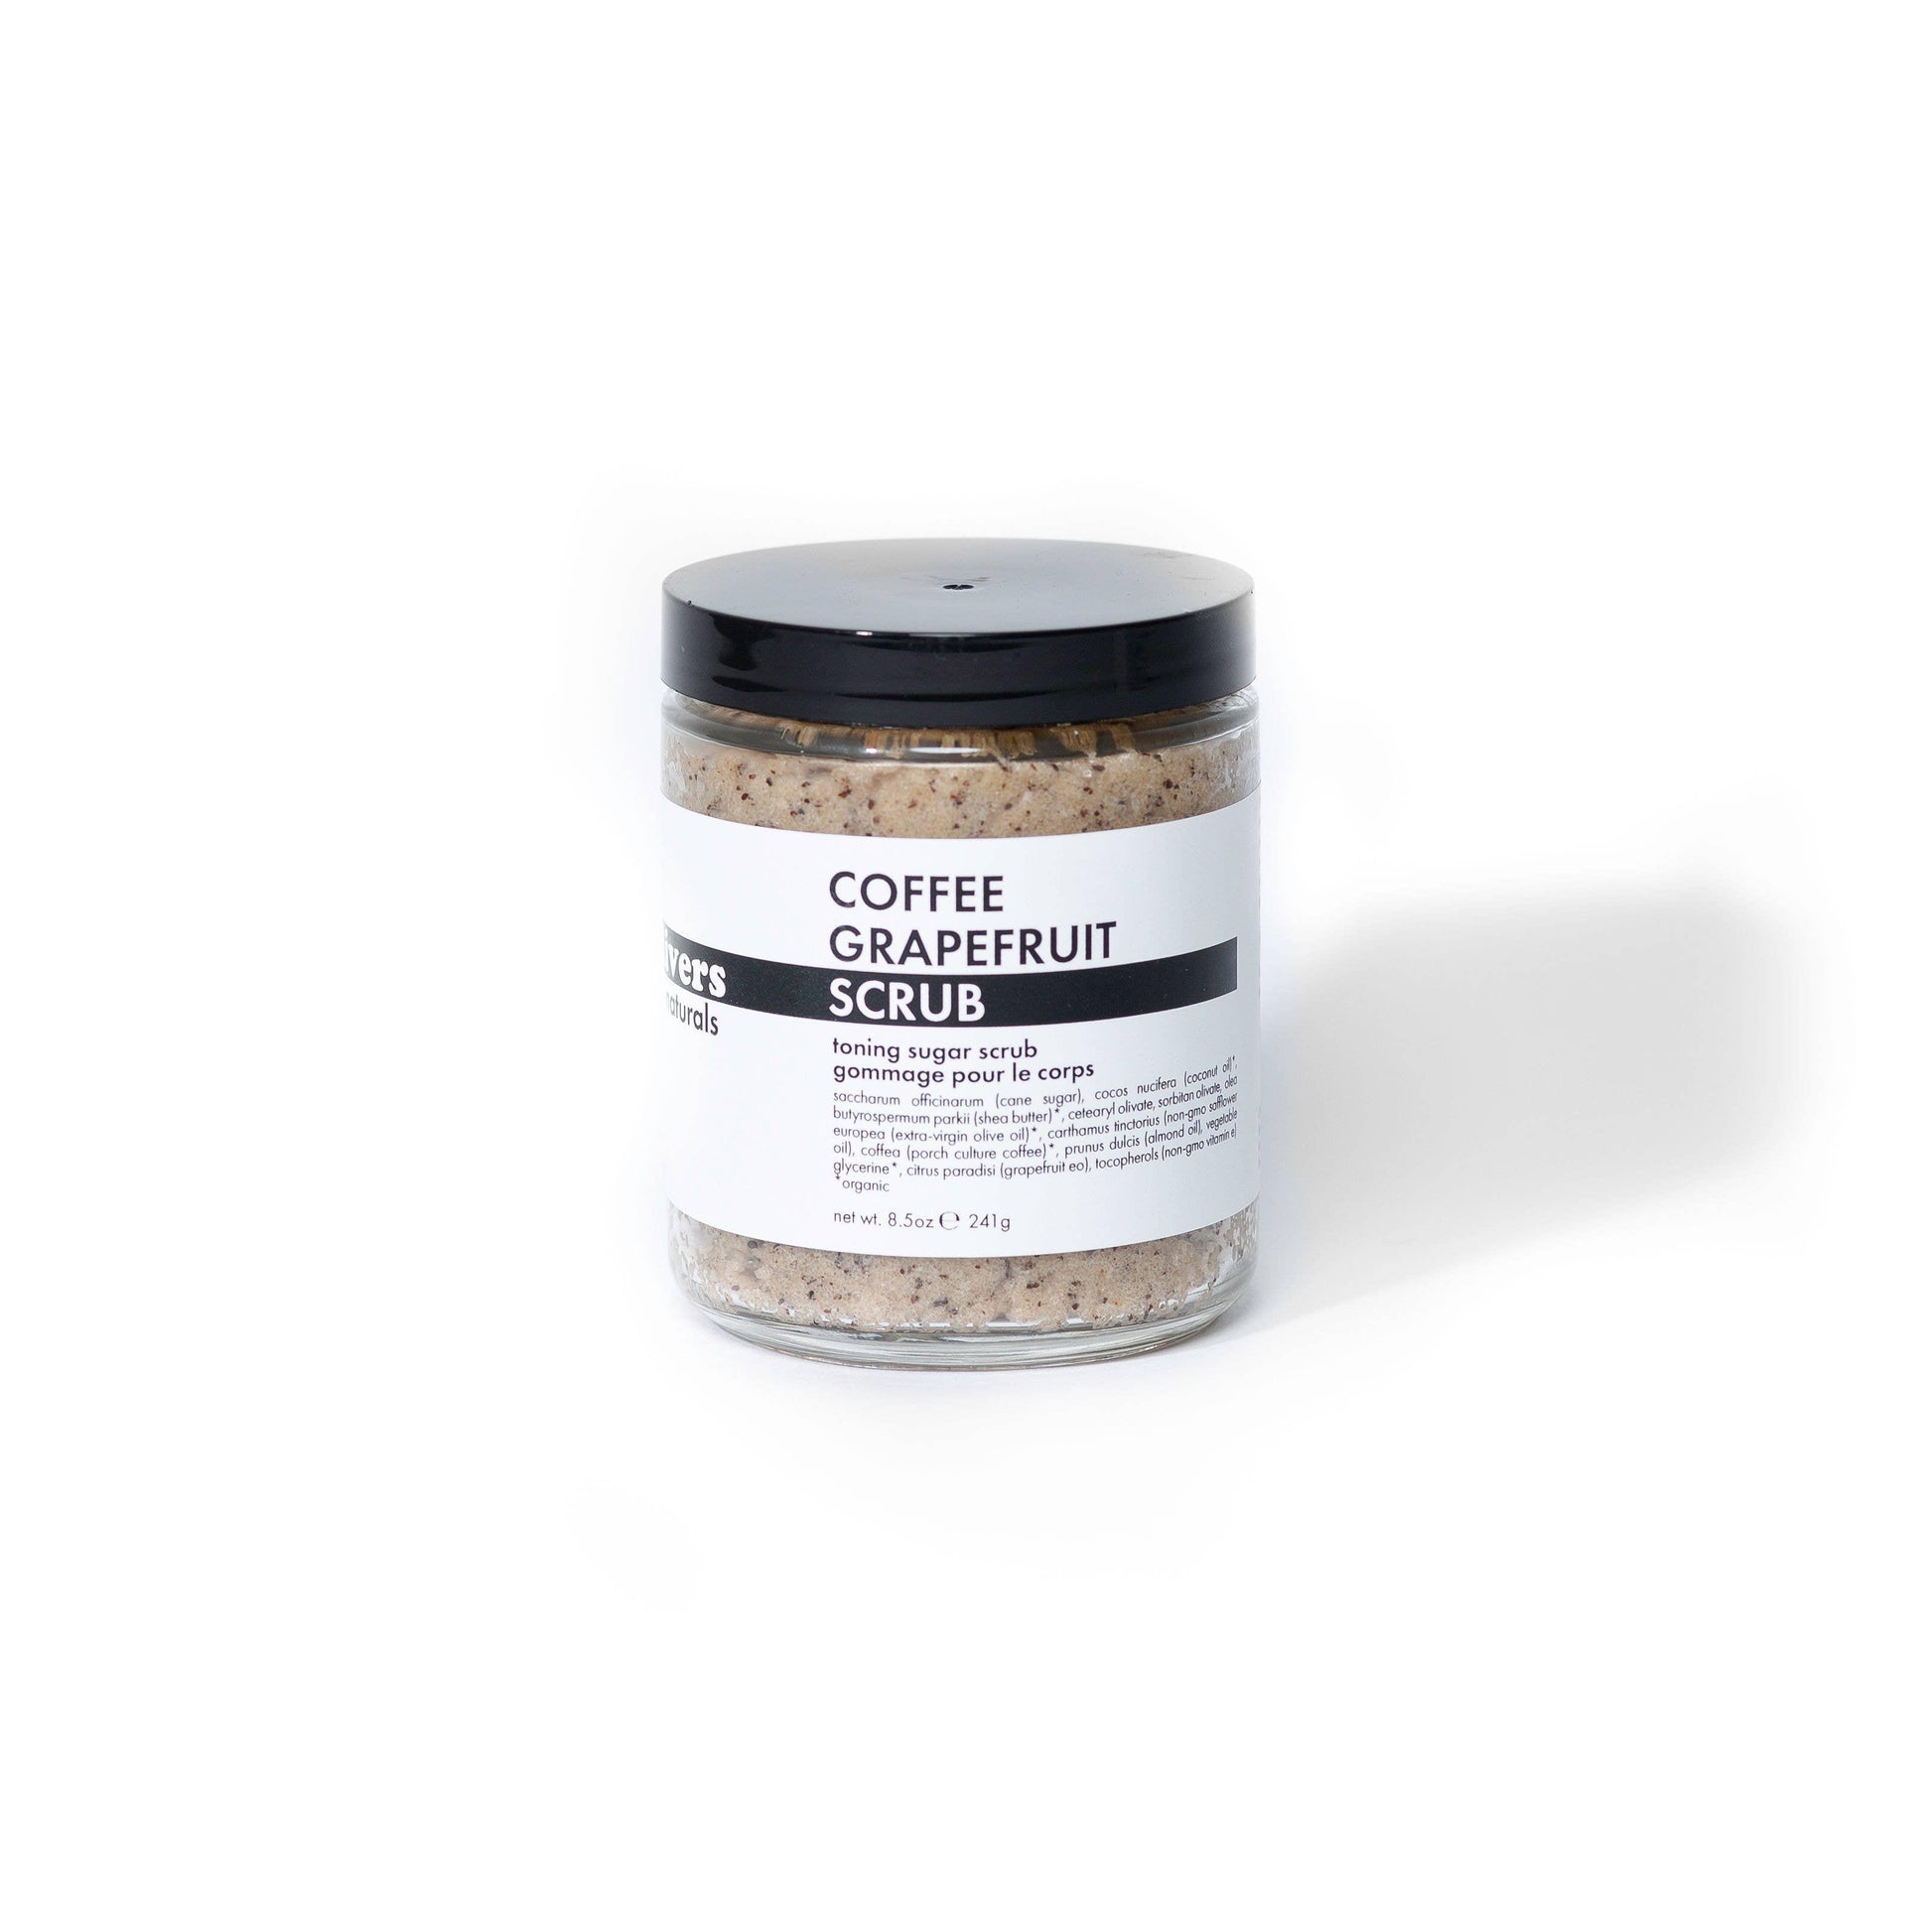 Coffee Grapefruit Scrub by Moon Rivers Naturals - Haven